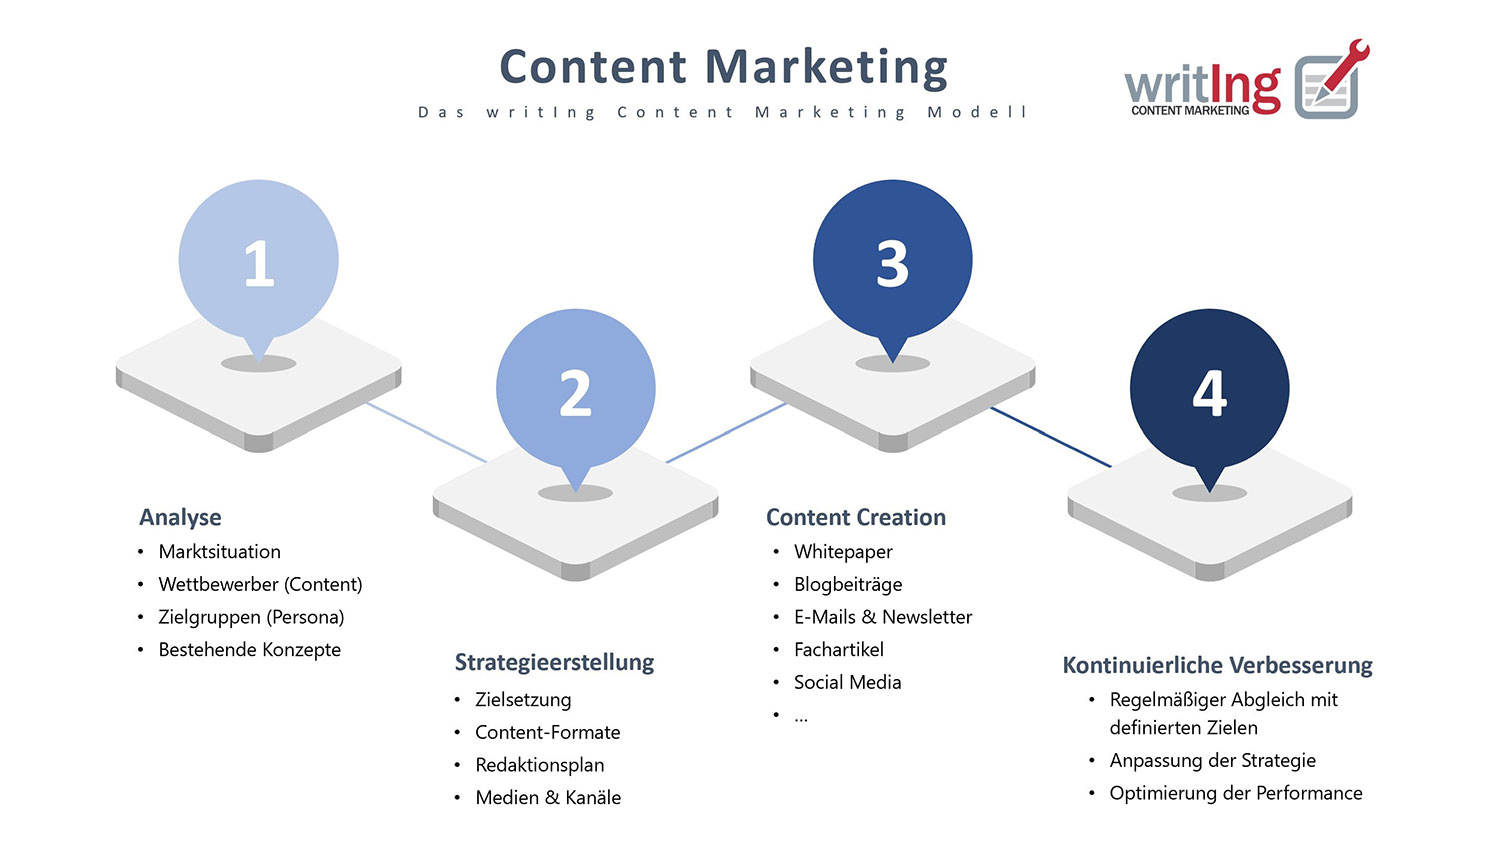 Content Marketing Modell